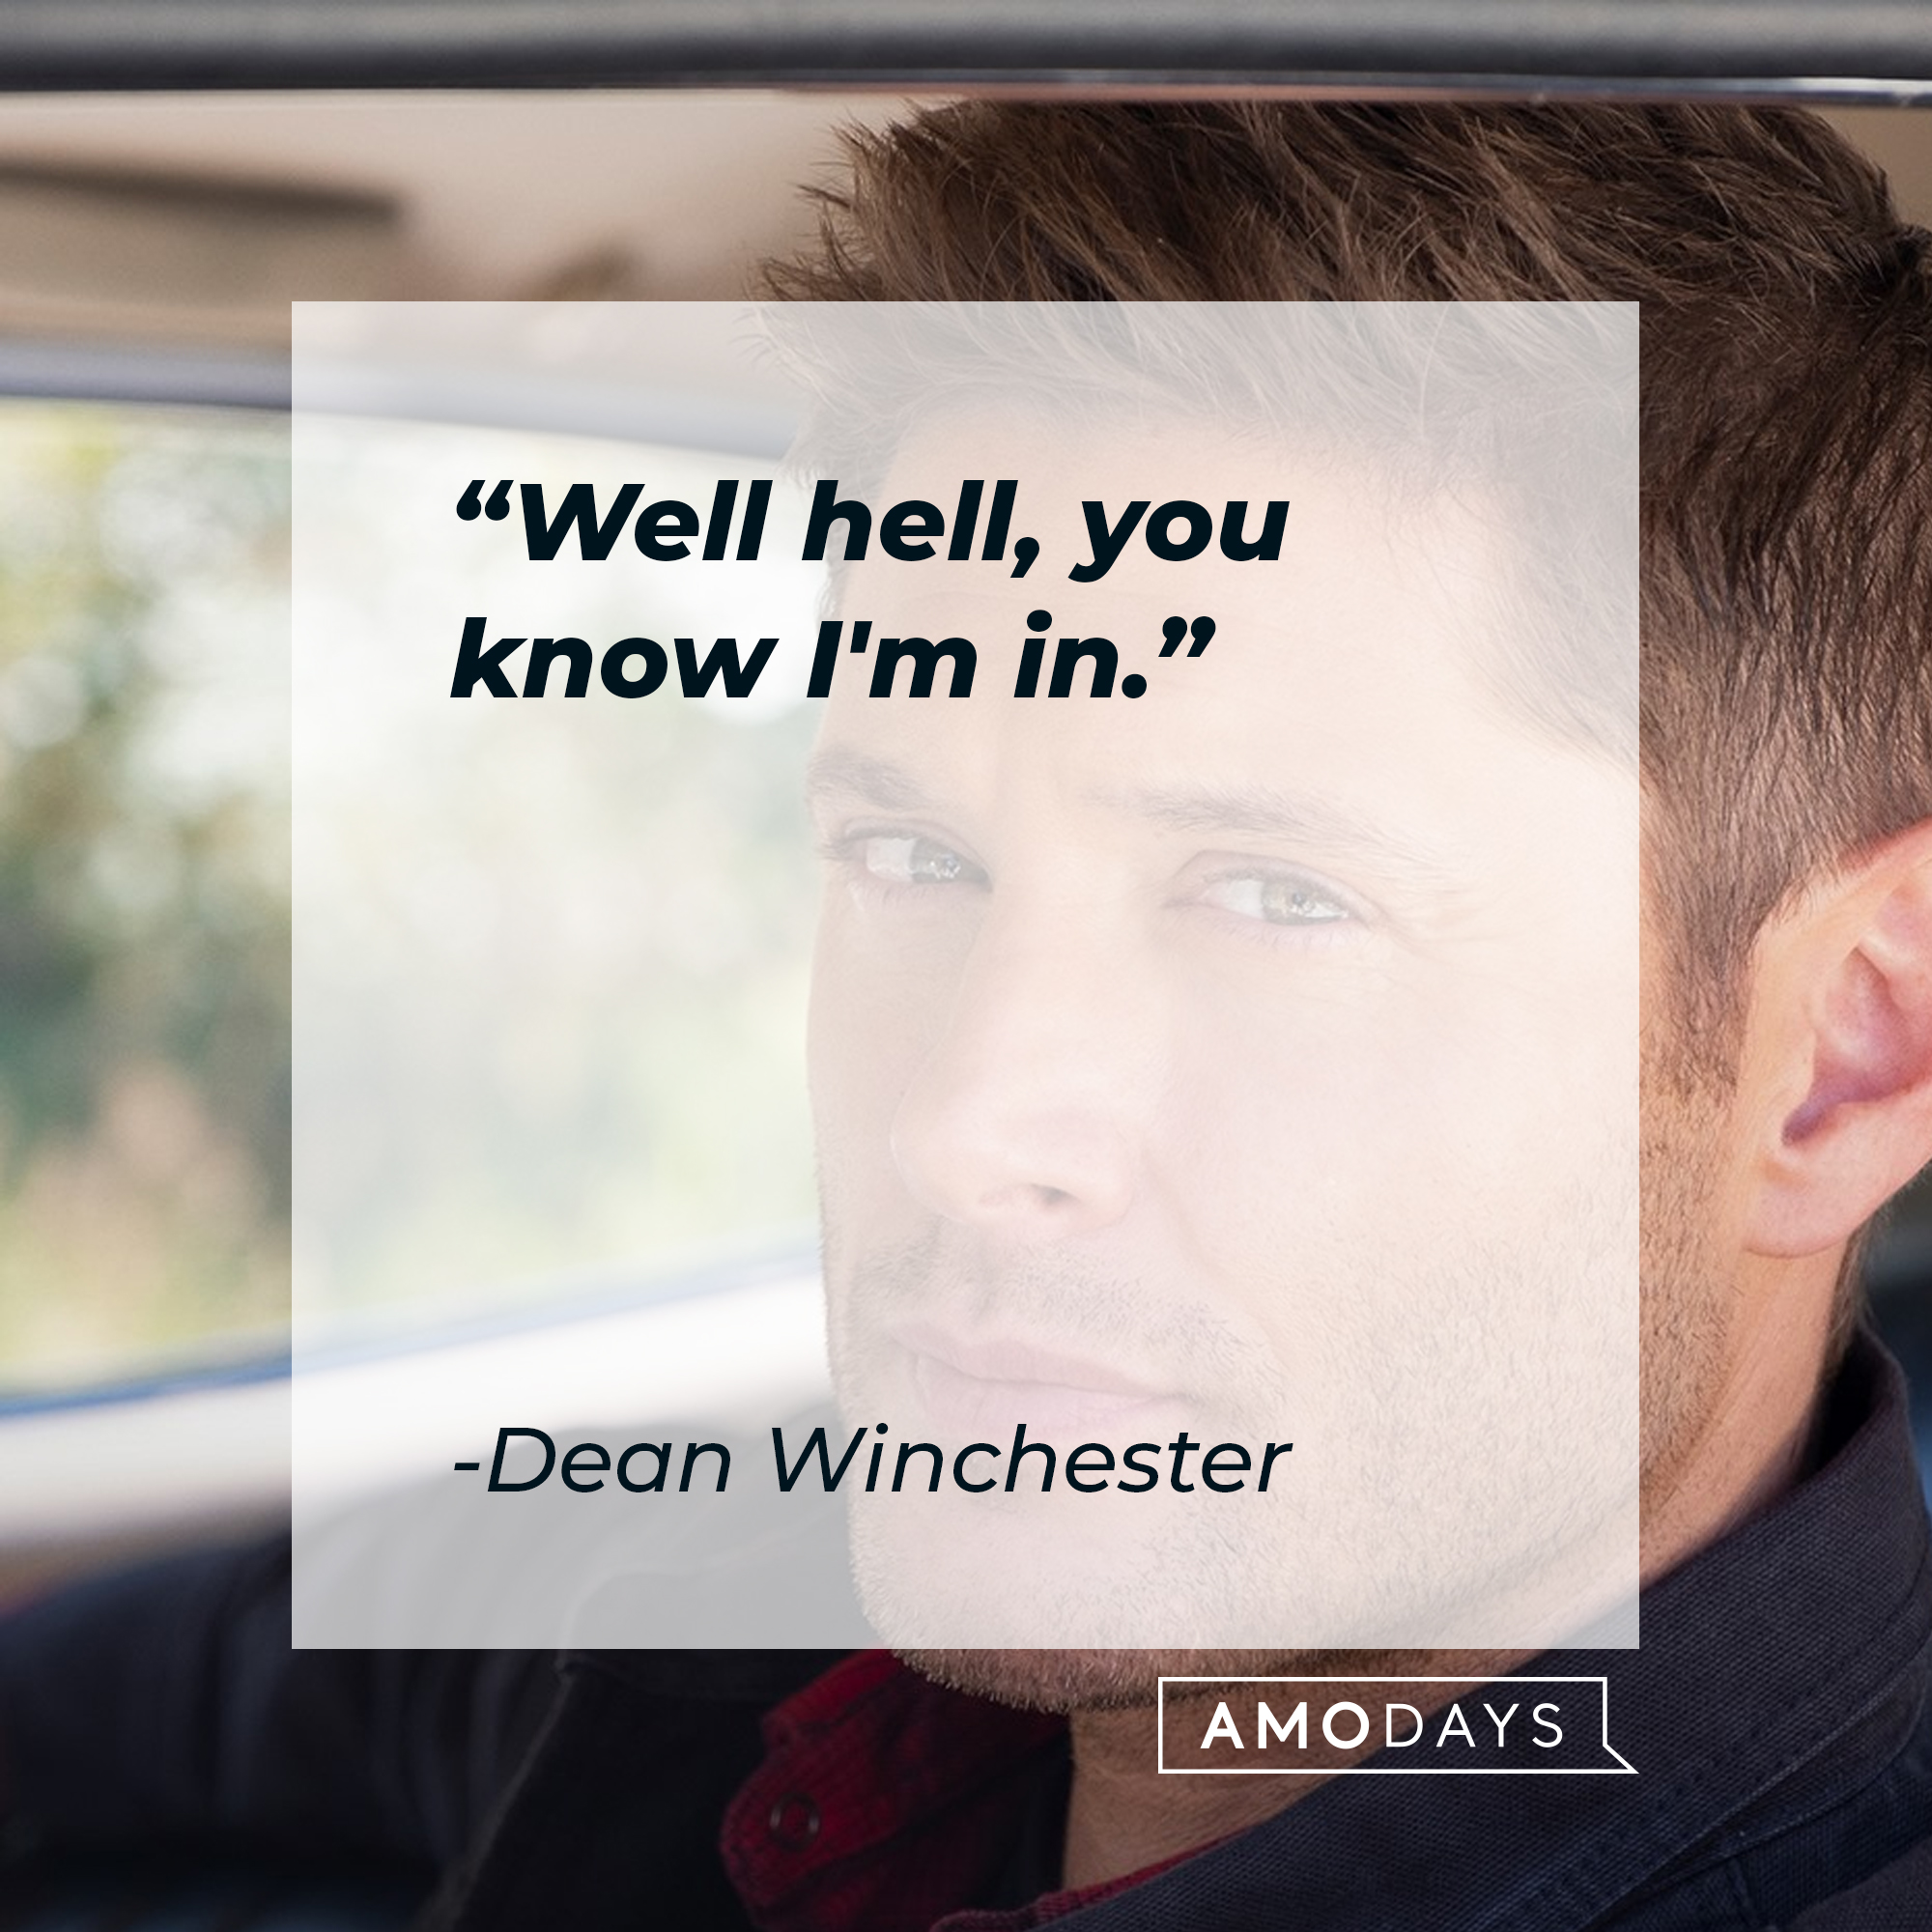 Dean Winchester's quote: "Well hell, you know I'm in. | Source: facebook.com/Supernatural